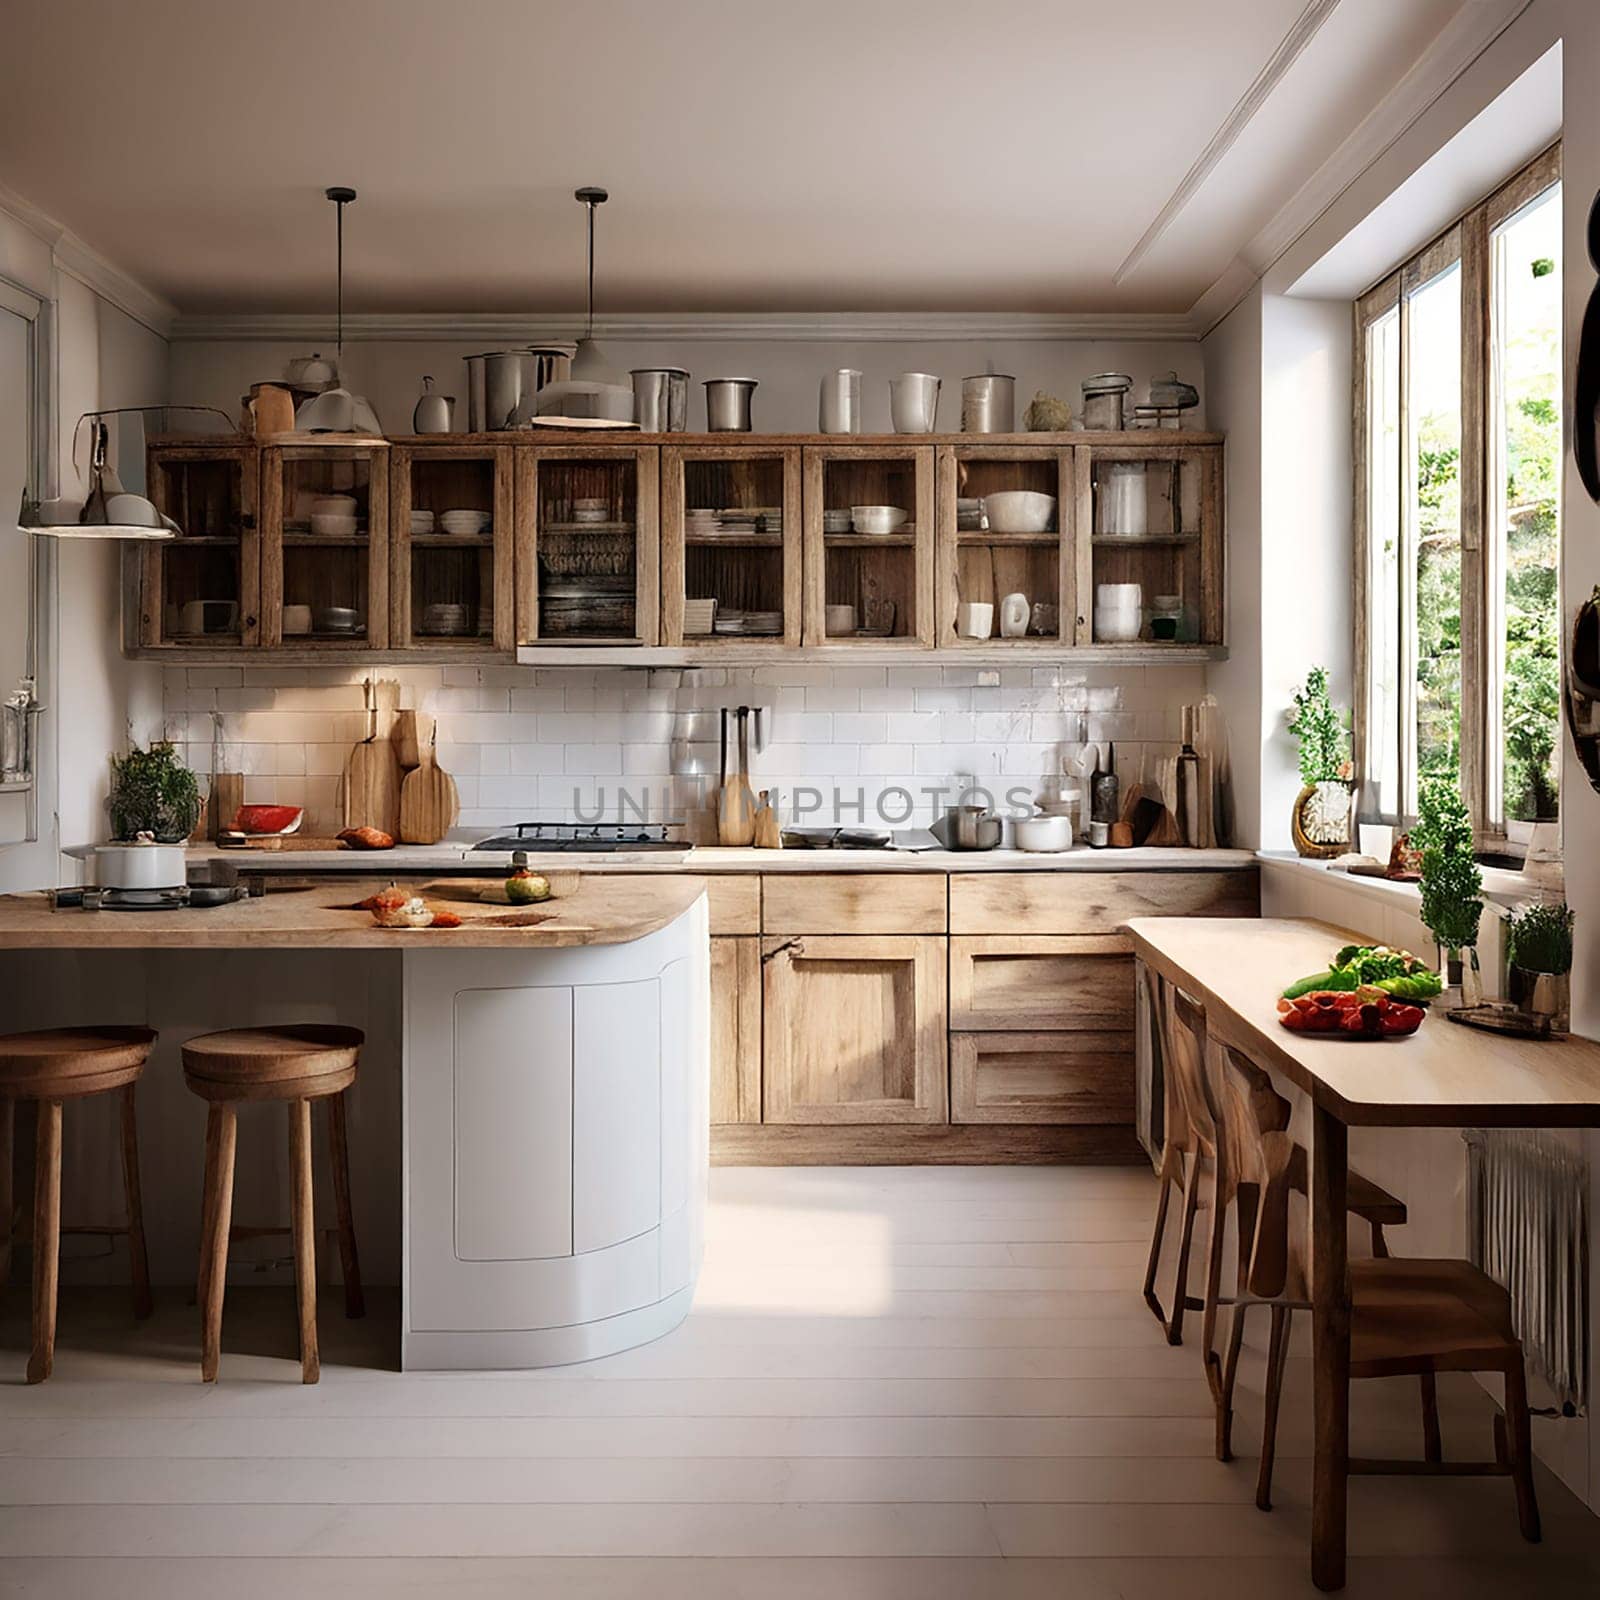 Bringing Nature Indoors: Organic Elements in Kitchen Design by Petrichor